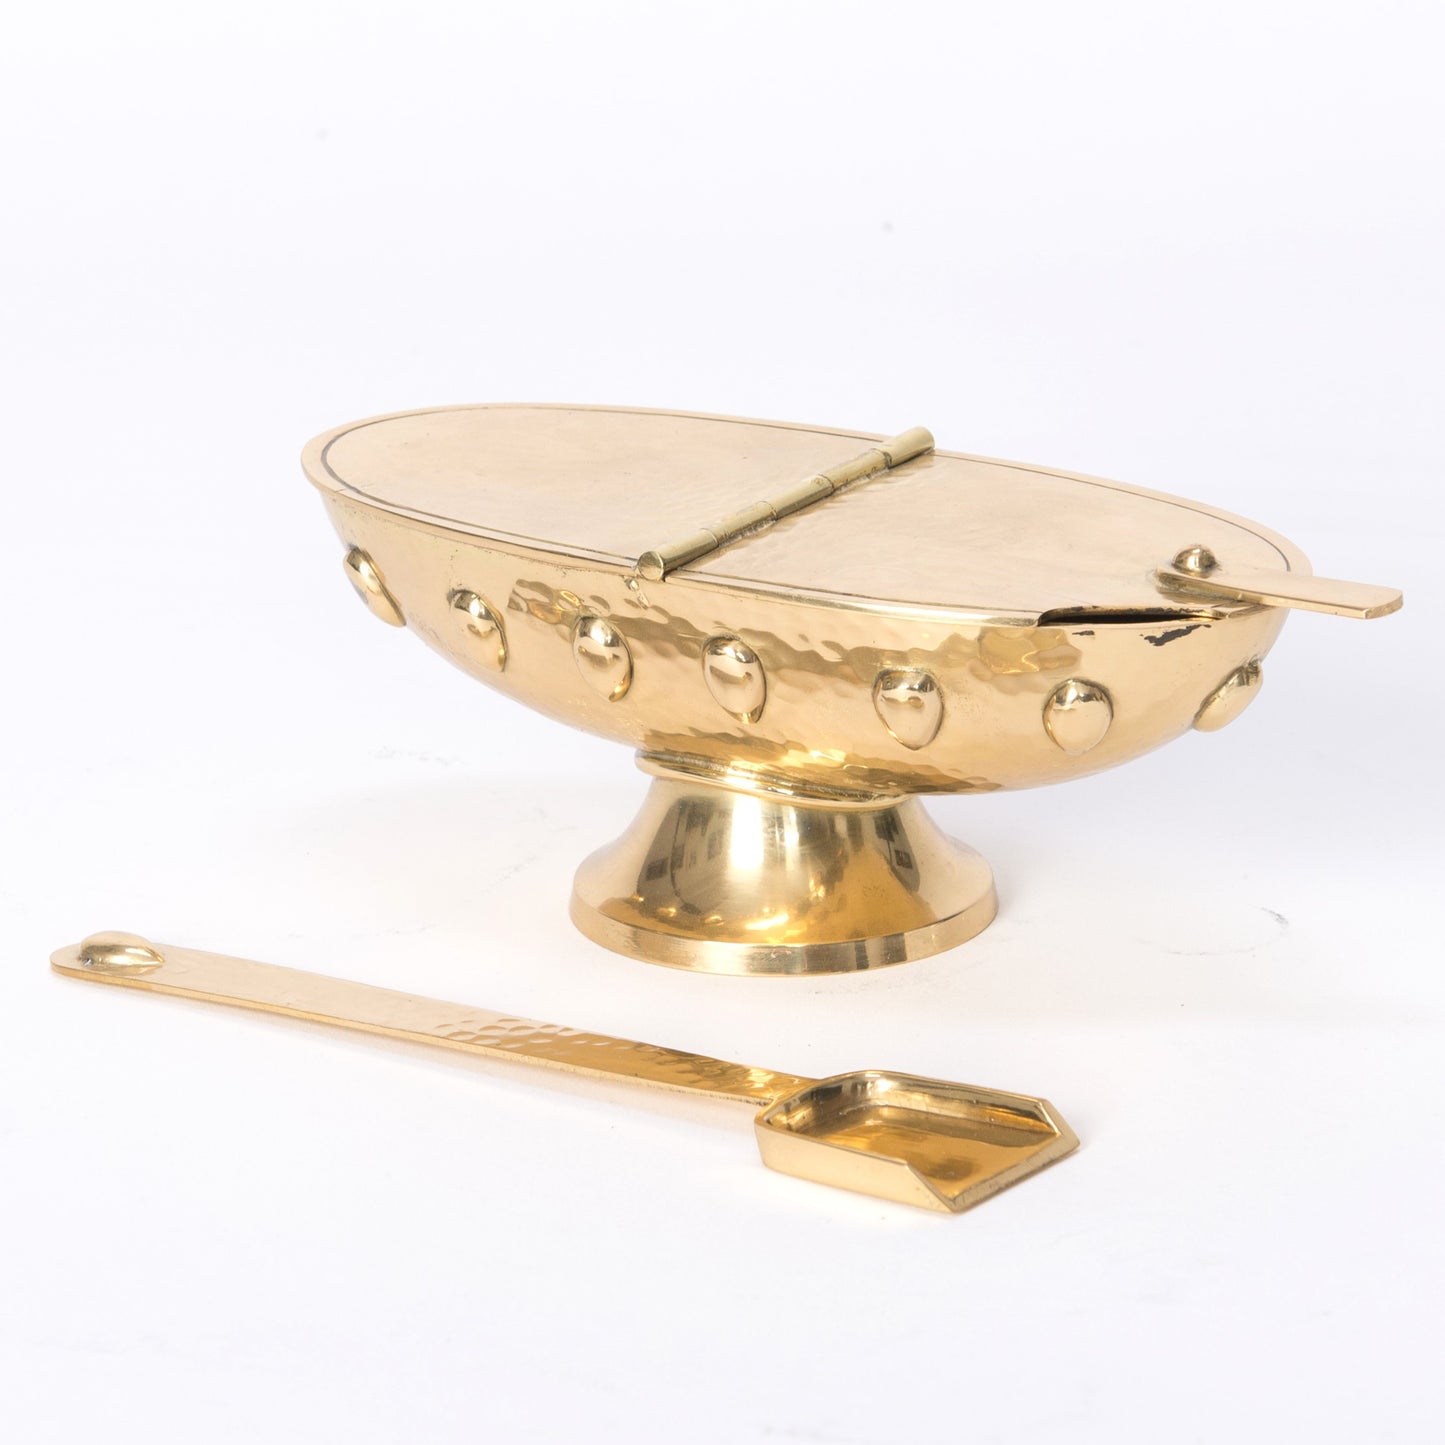 H-172B Incense Boat and Spoon